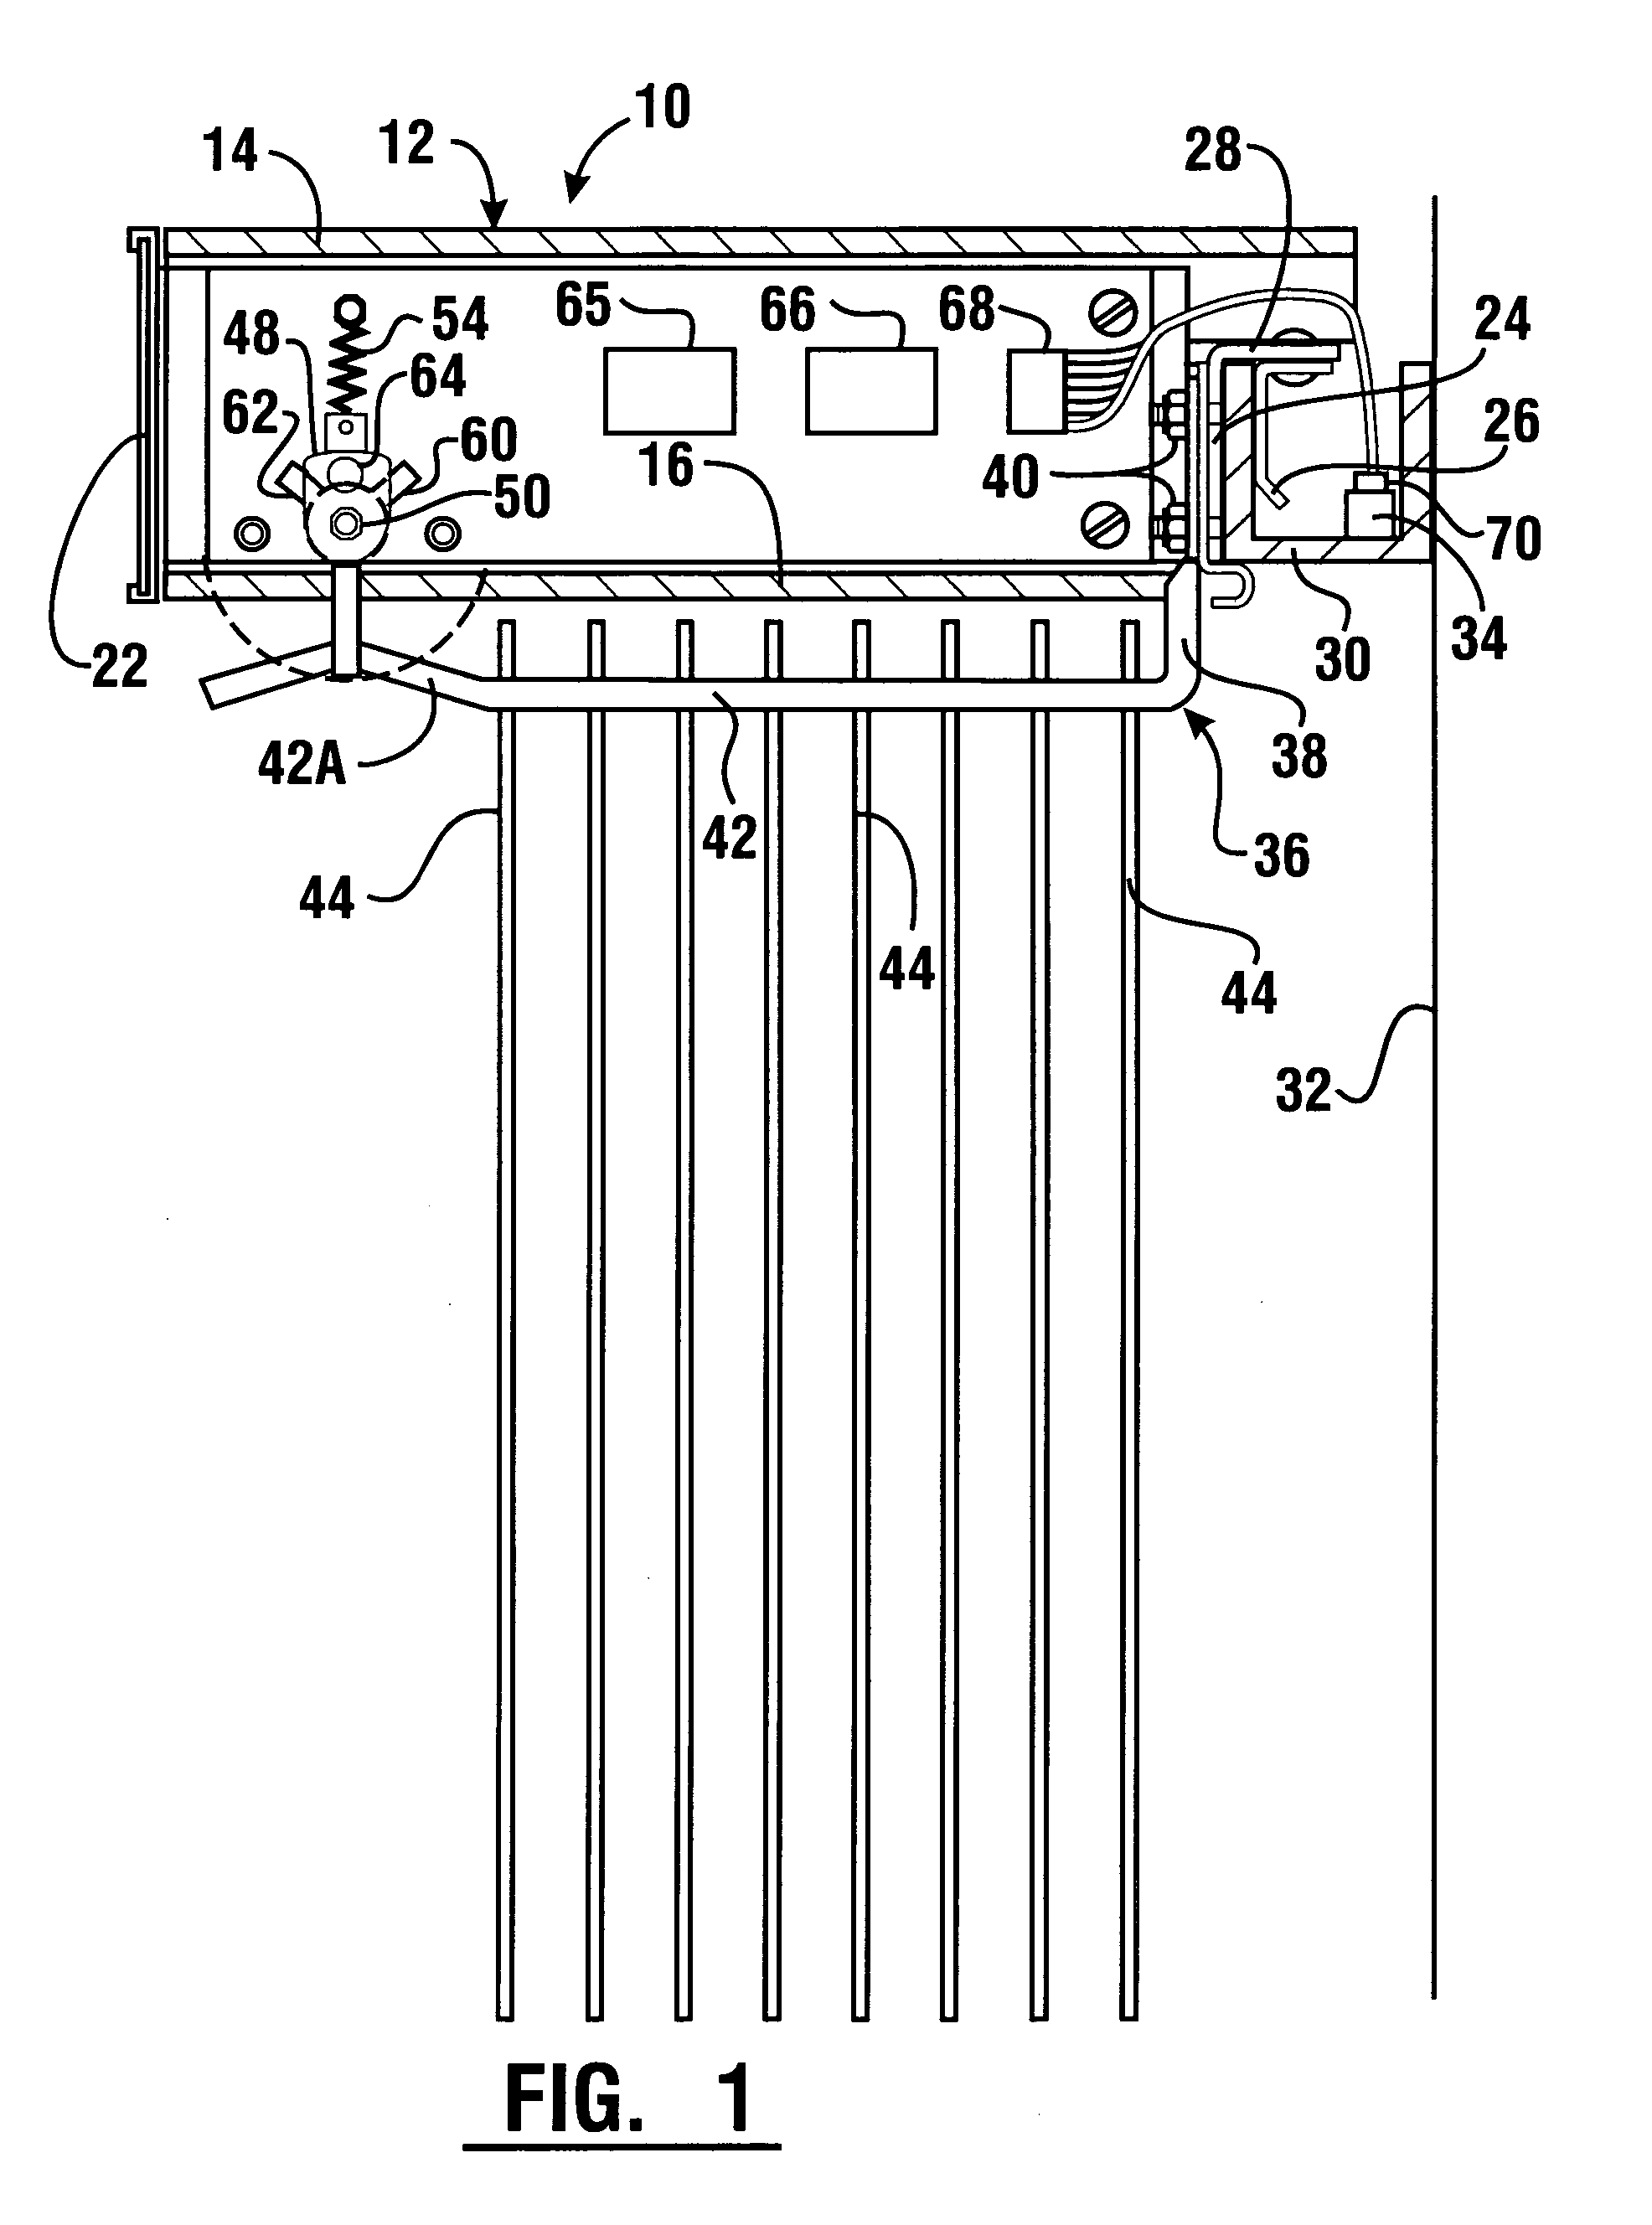 Method of dispensing and tracking the giving of medical items to patients